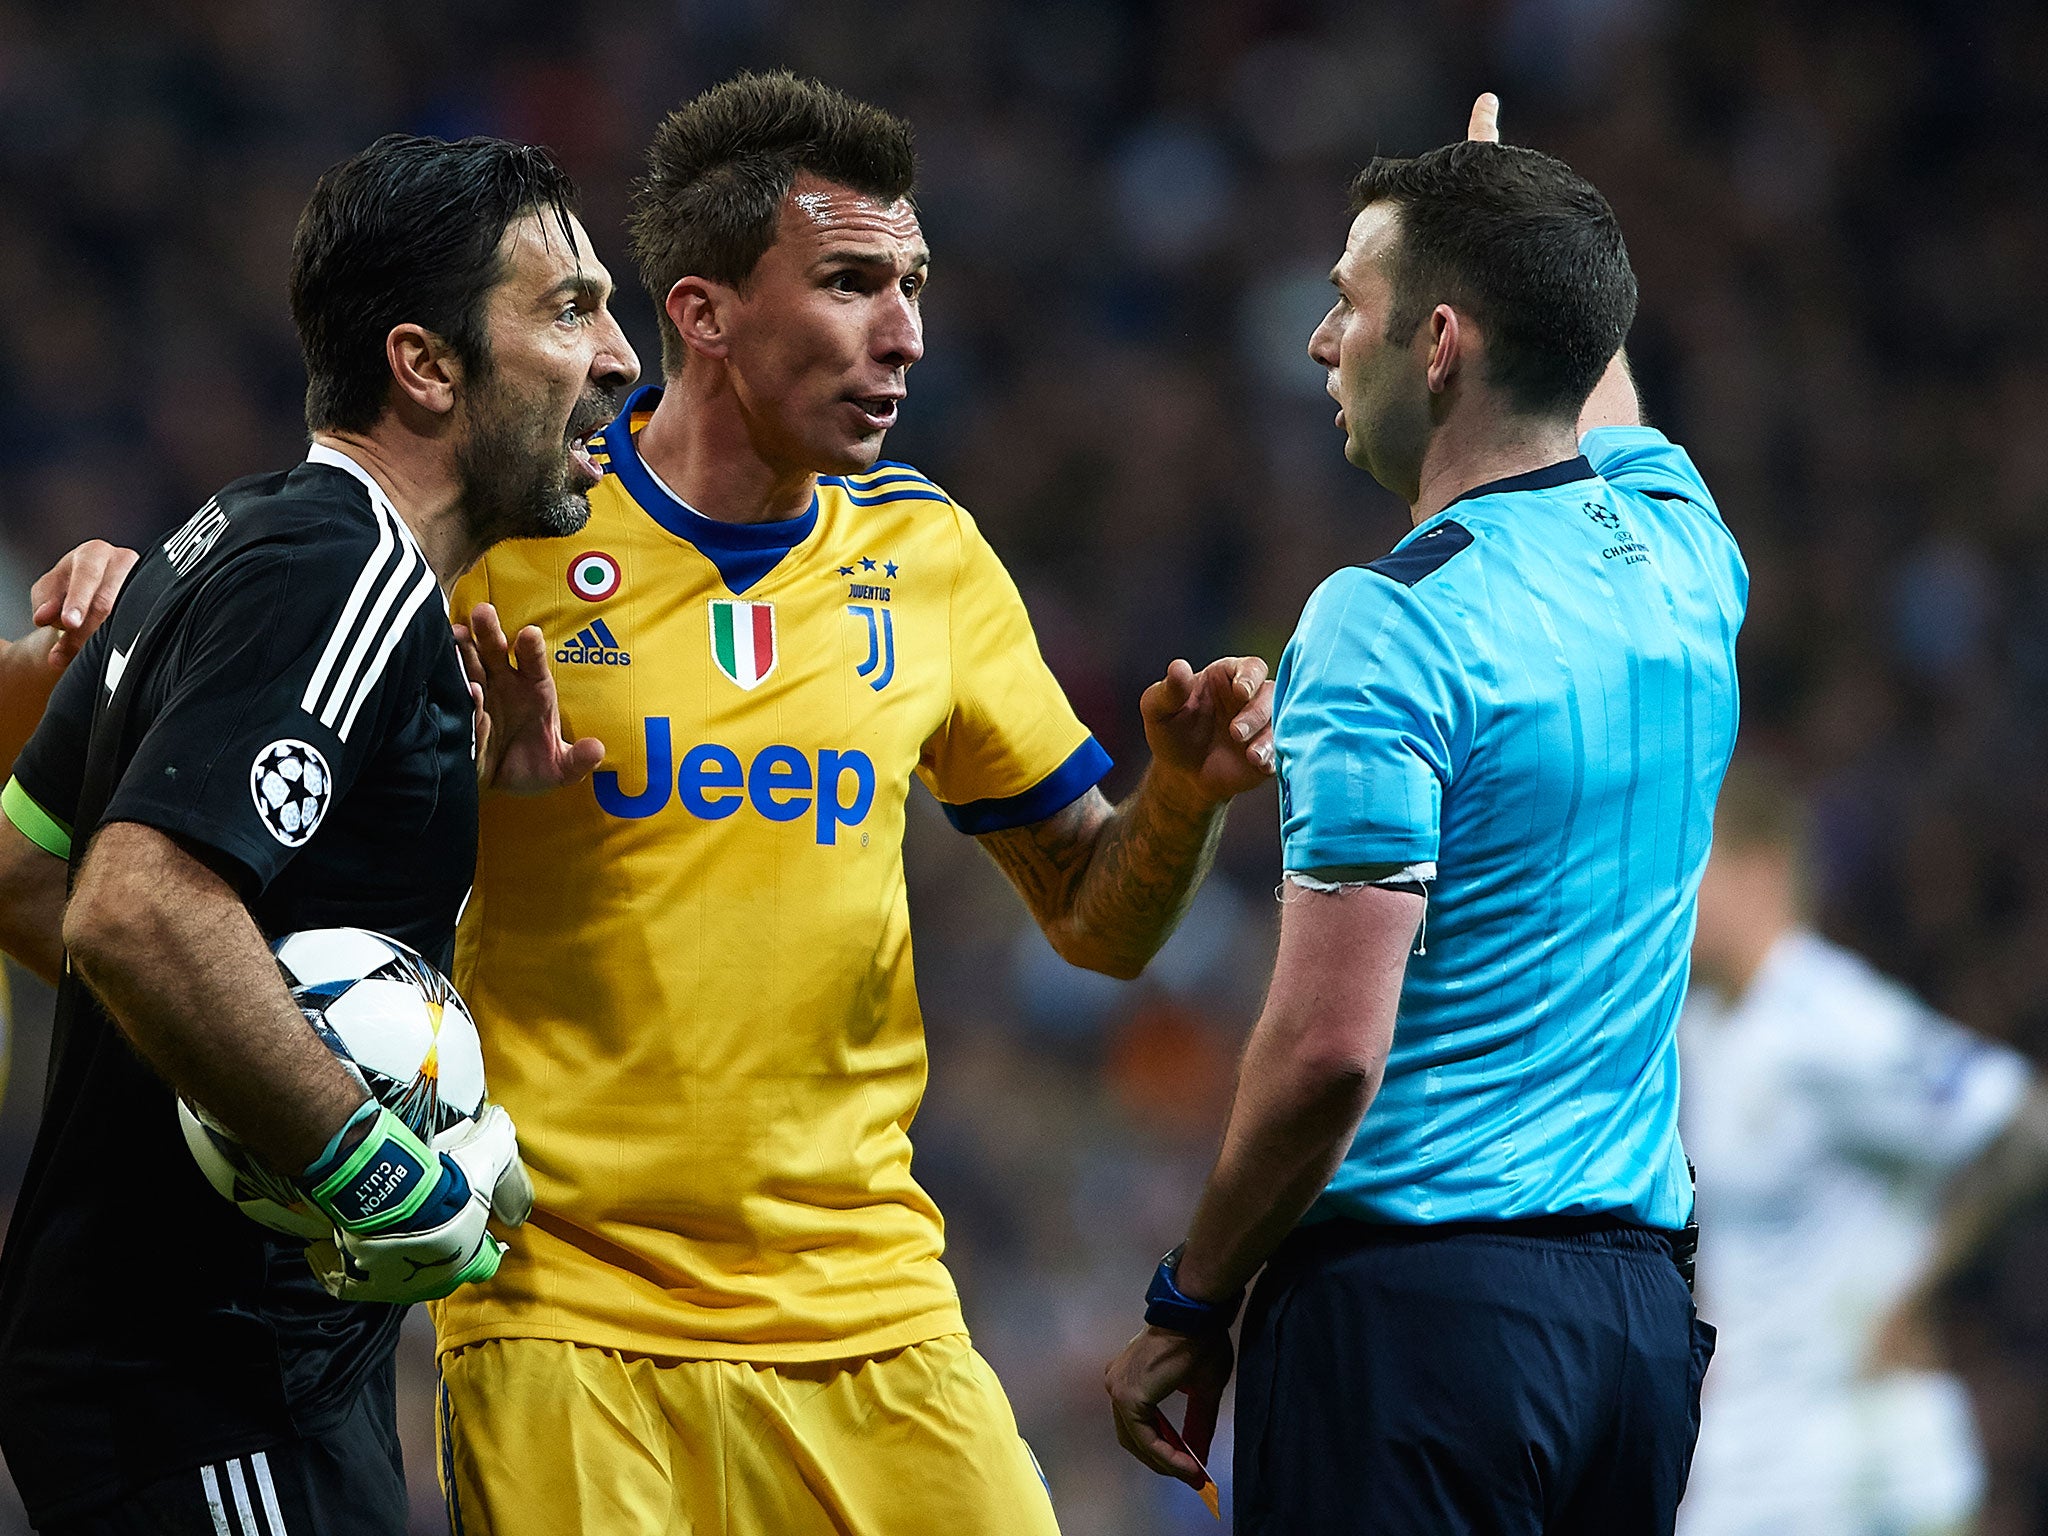 Michael Oliver and wife offered police support after social media abuse over Juventus penalty decision